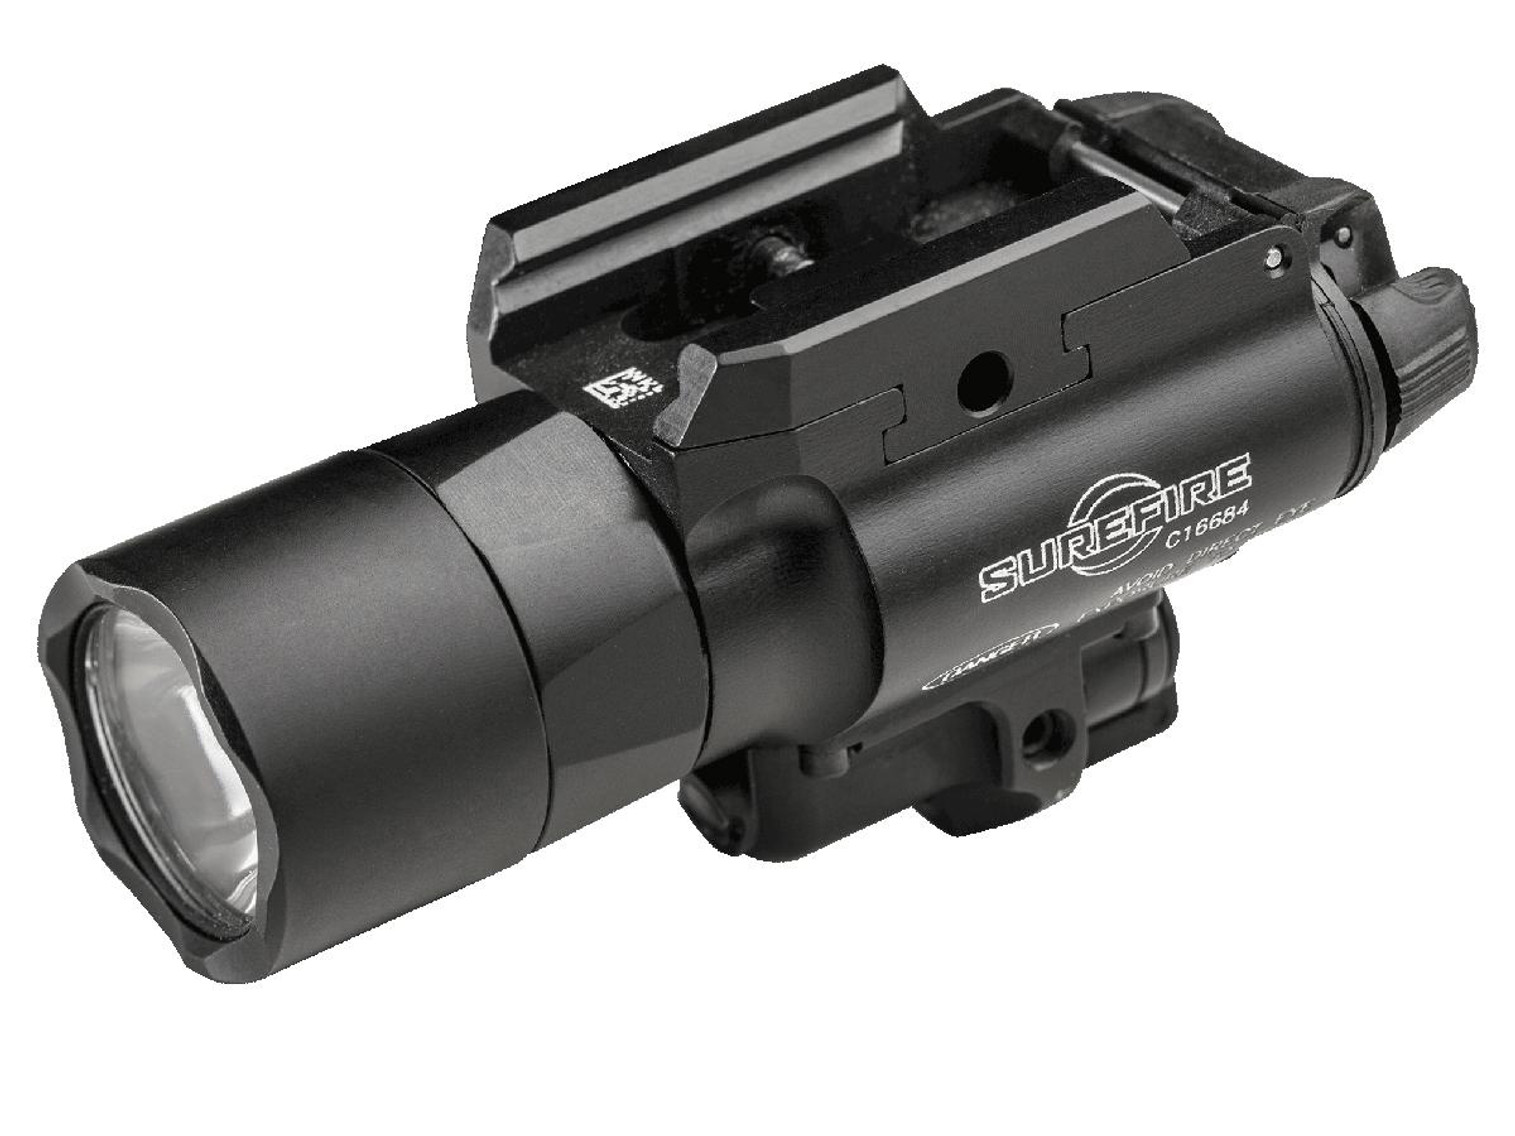 Surefire X400UH-A Ultra High Output 600 Lumens LED Weapon Light with Red Laser